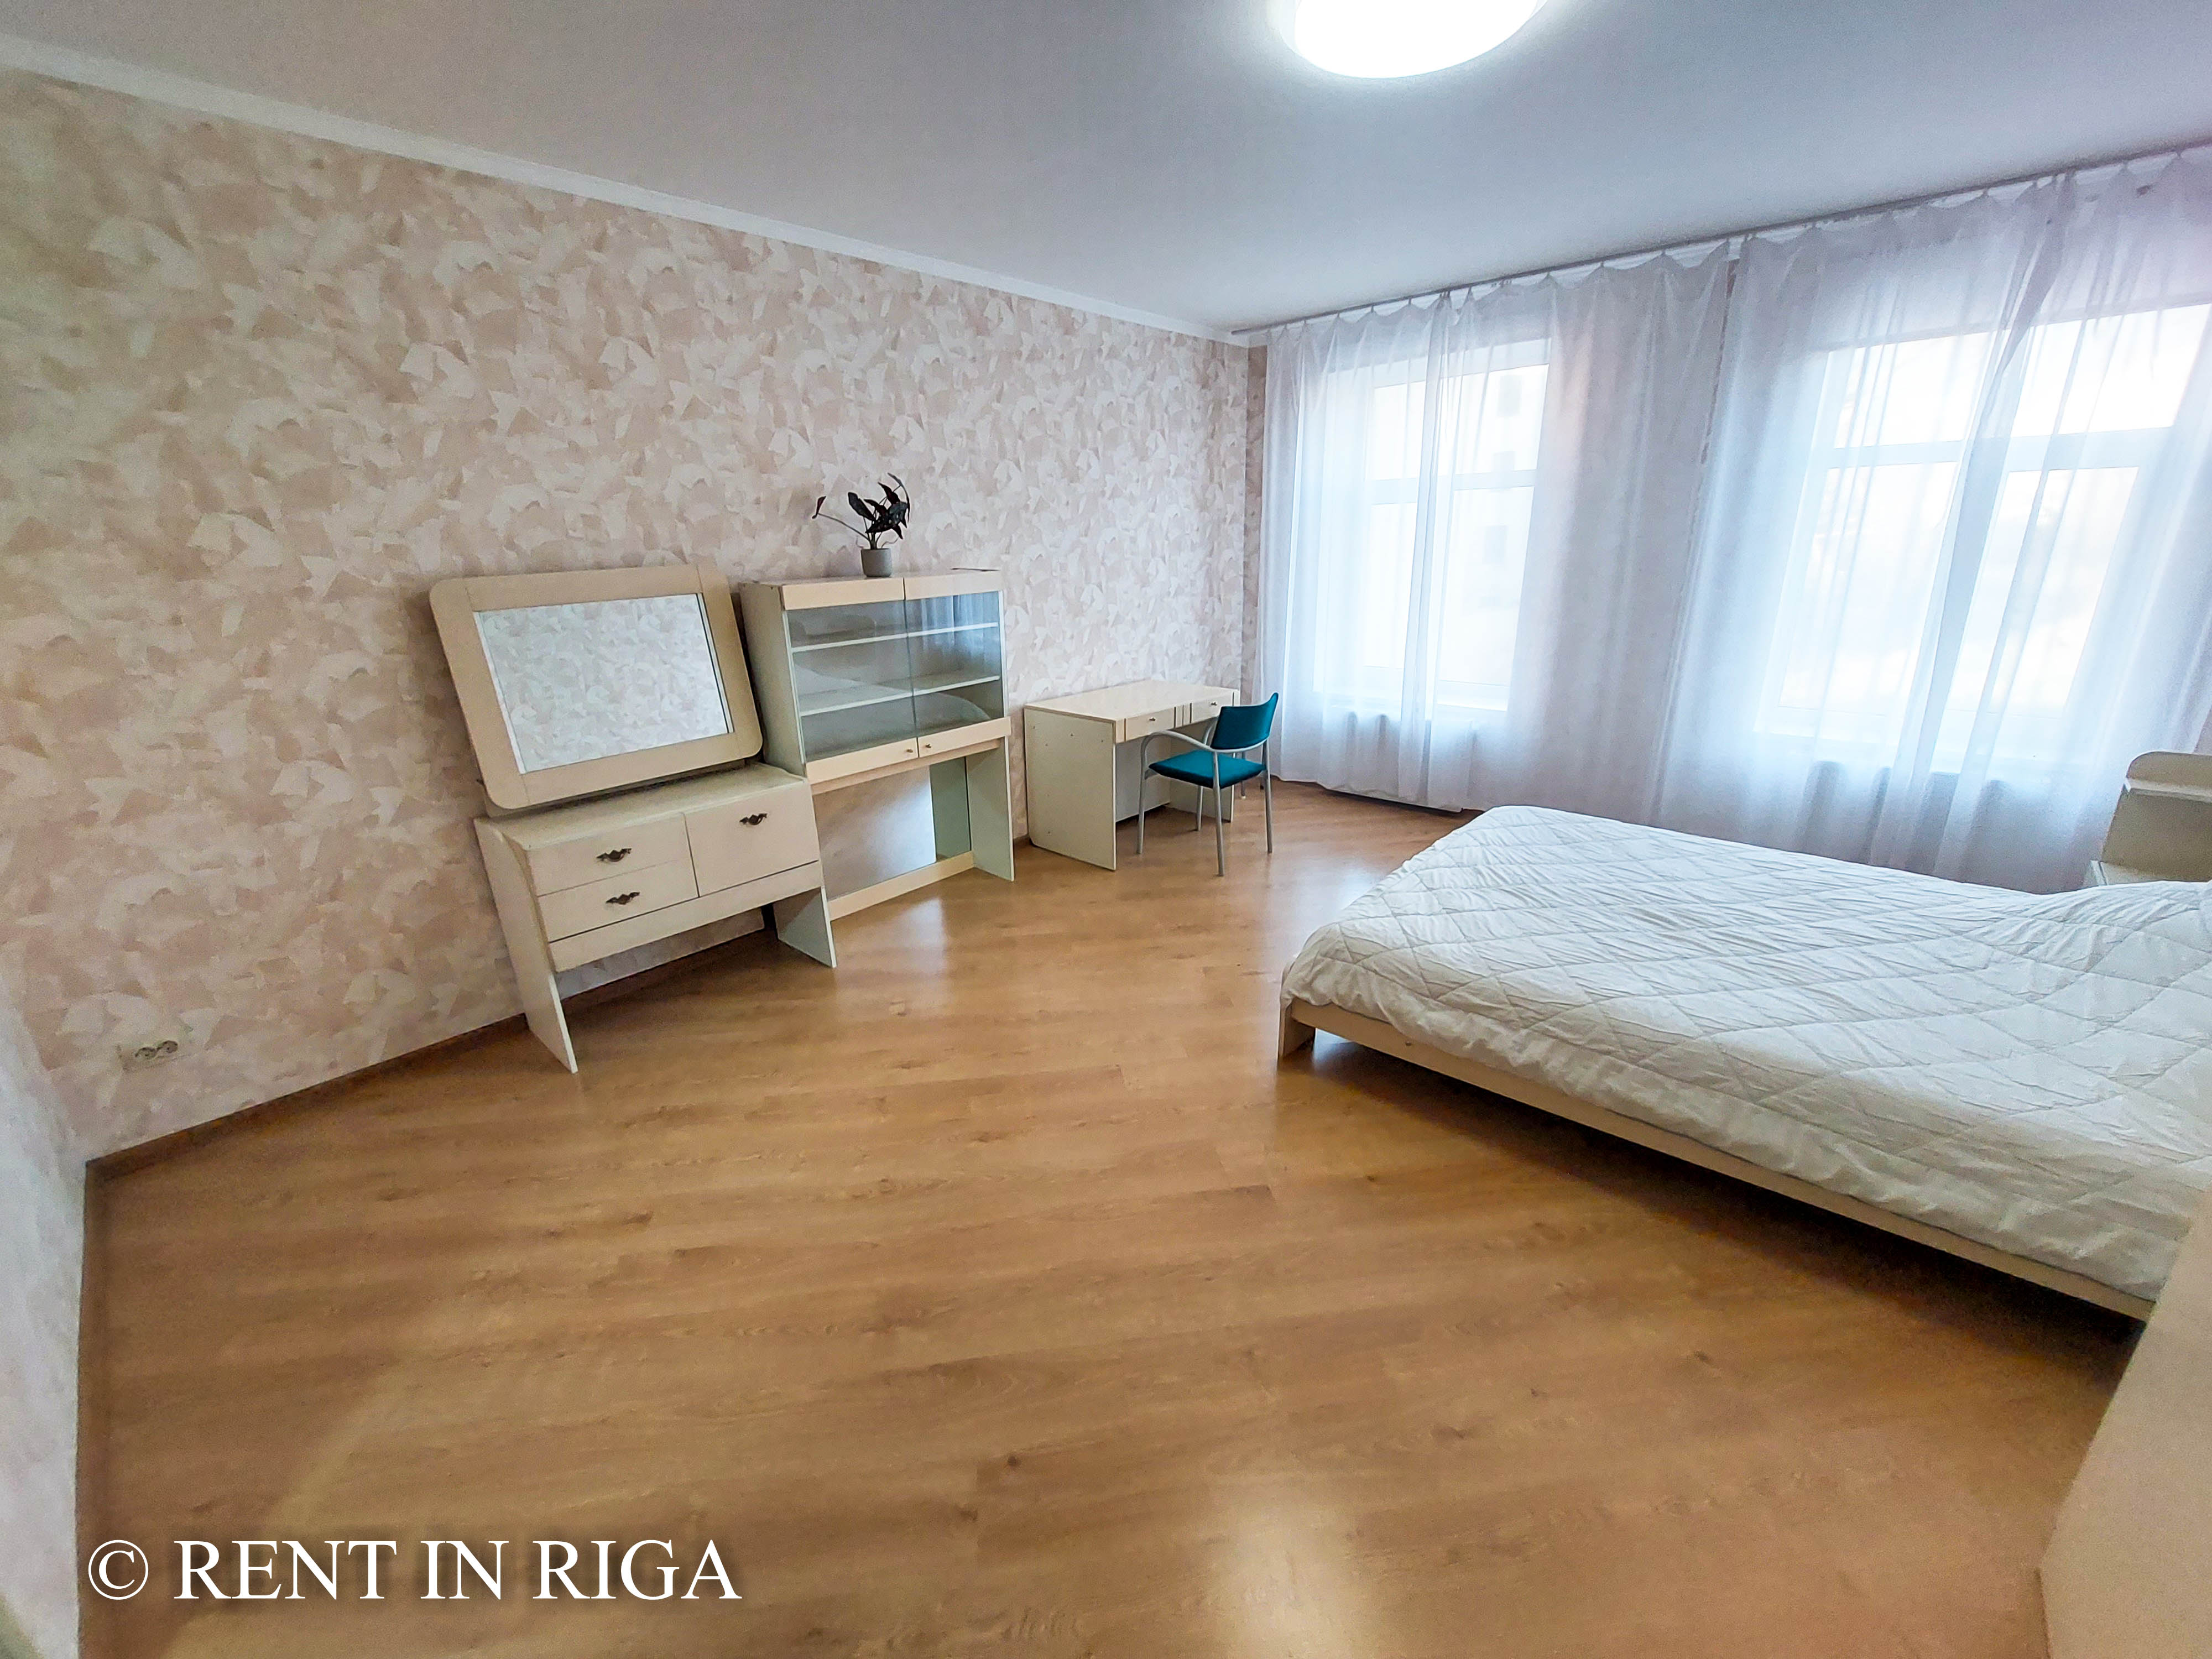 Apartment for rent, Jersikas street 18 - Image 1